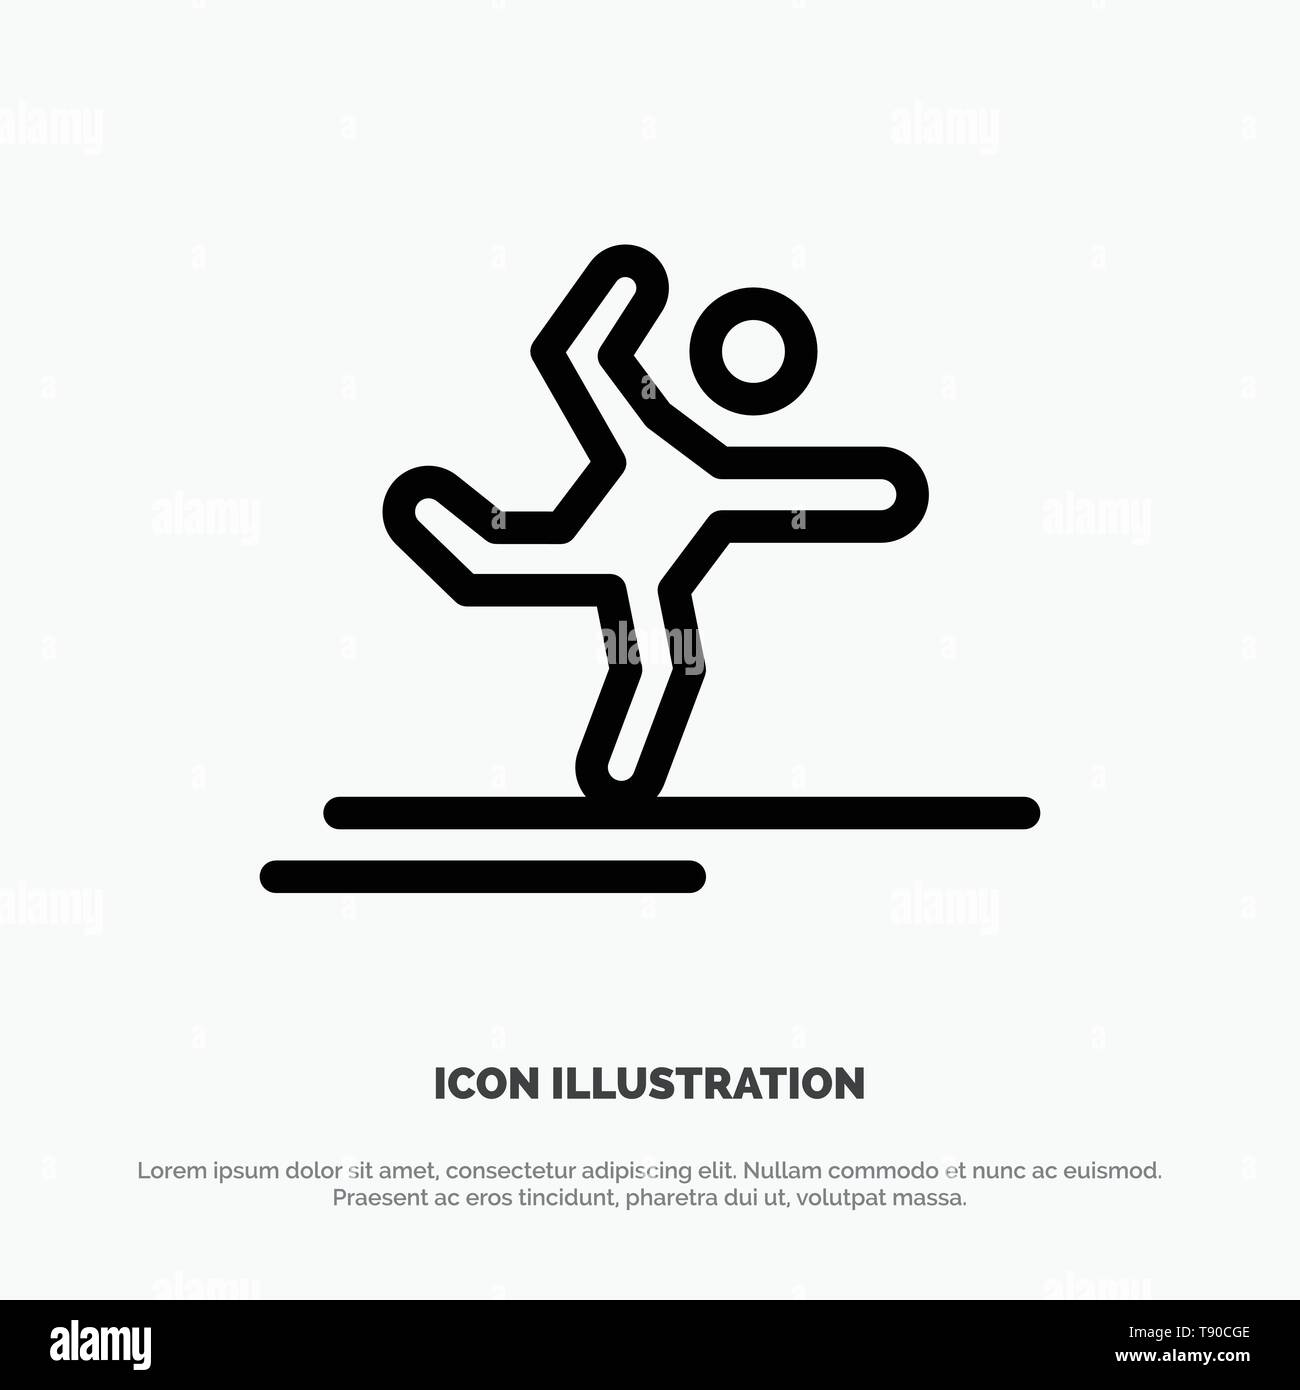 Athlete, Gymnastics, Performing, Stretching Line Icon Vector Stock ...